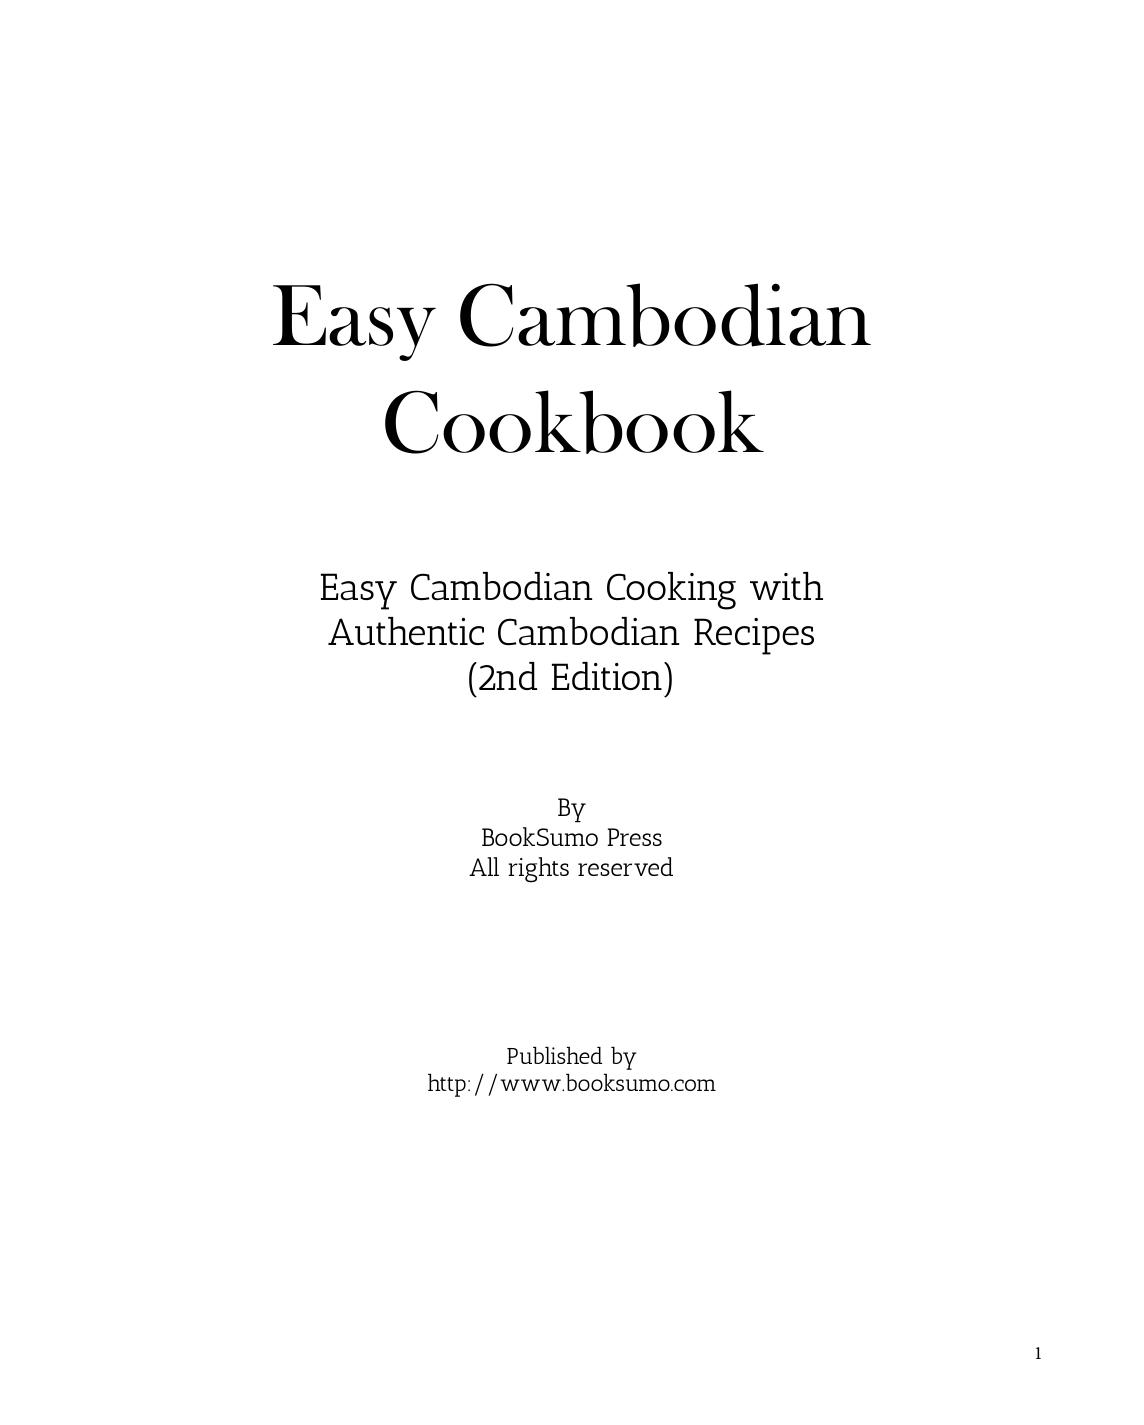 Easy Cambodian Cookbook: Easy Cambodian Cooking with Authentic South-East Asian Recipes by BookSumo Press